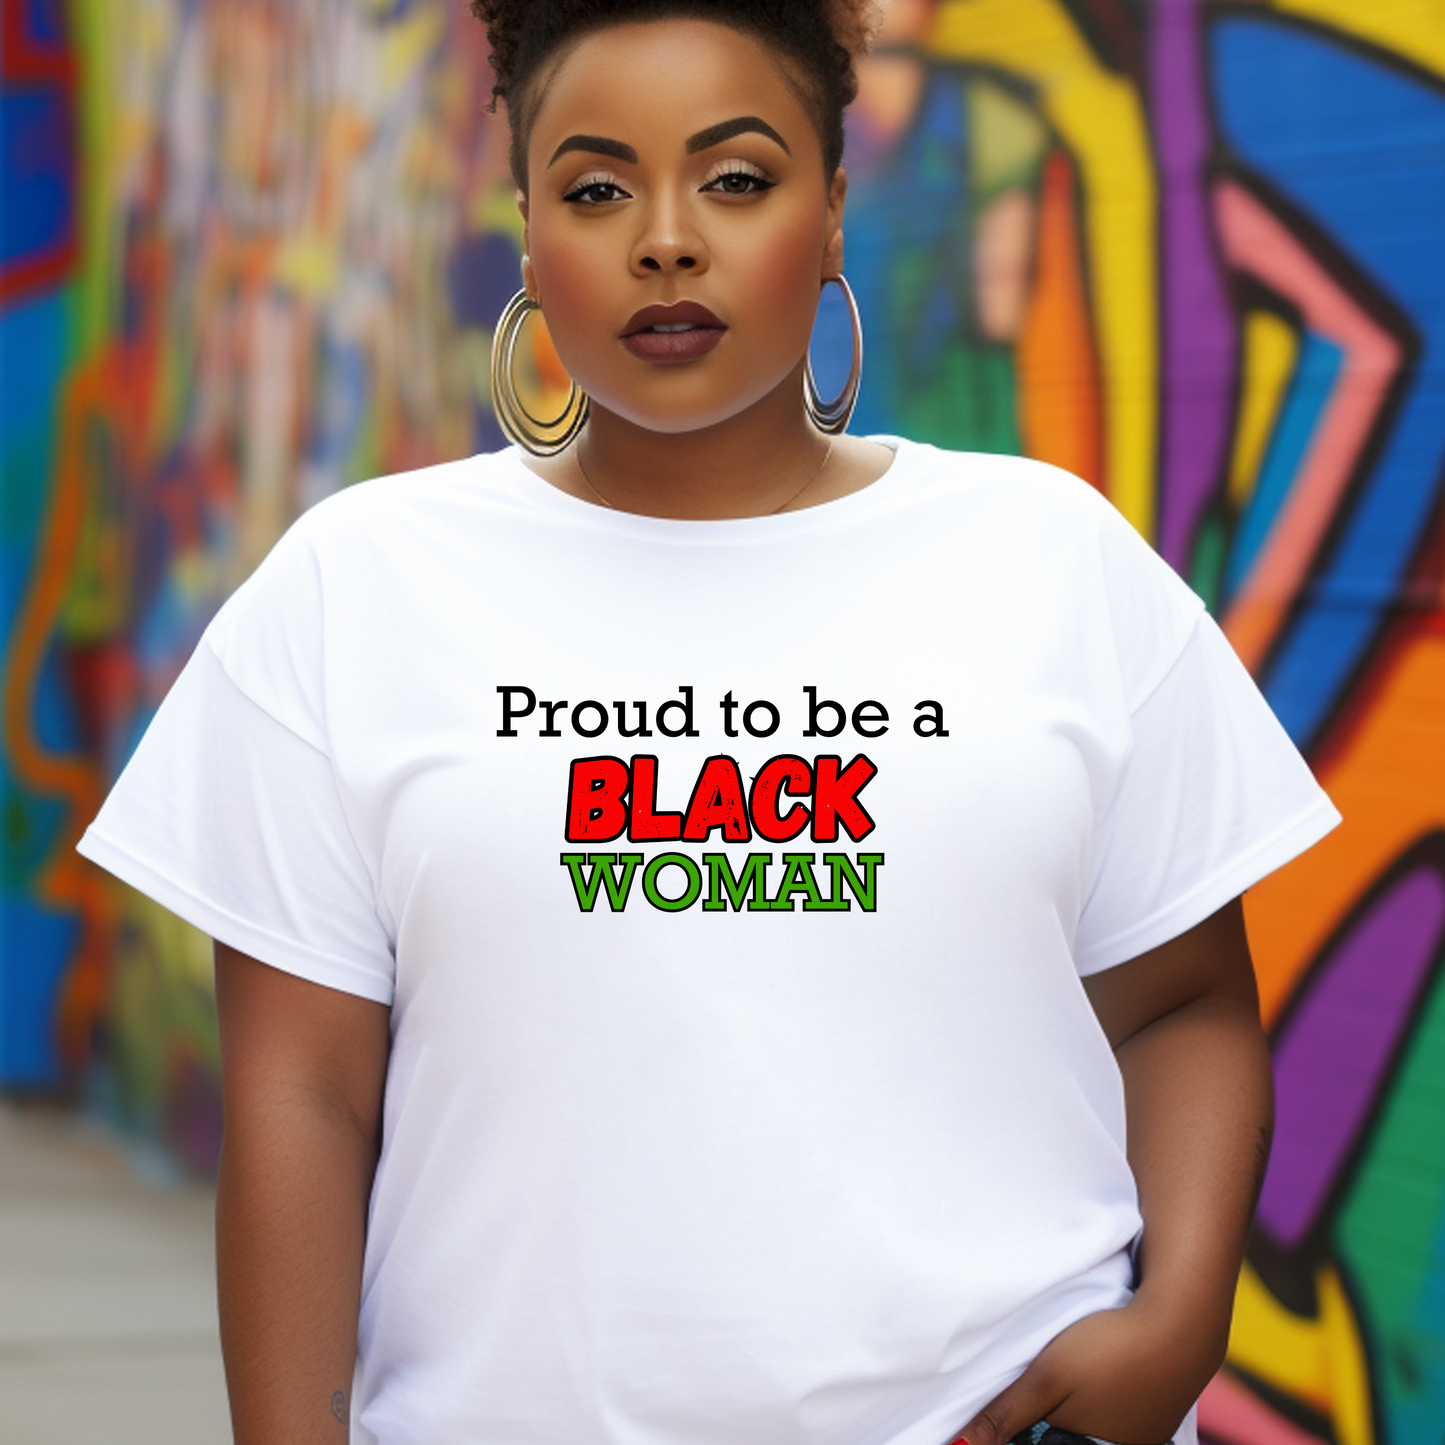  Introducing our empowering "Proud to be a Black Christian Woman" t-shirt. This stylish white tee celebrates the intersection of Black History and faith, allowing you to make a bold statement with confidence. 🖤✝️ #BlackChristianWoman #FaithFashion #BlackHistoryFashion